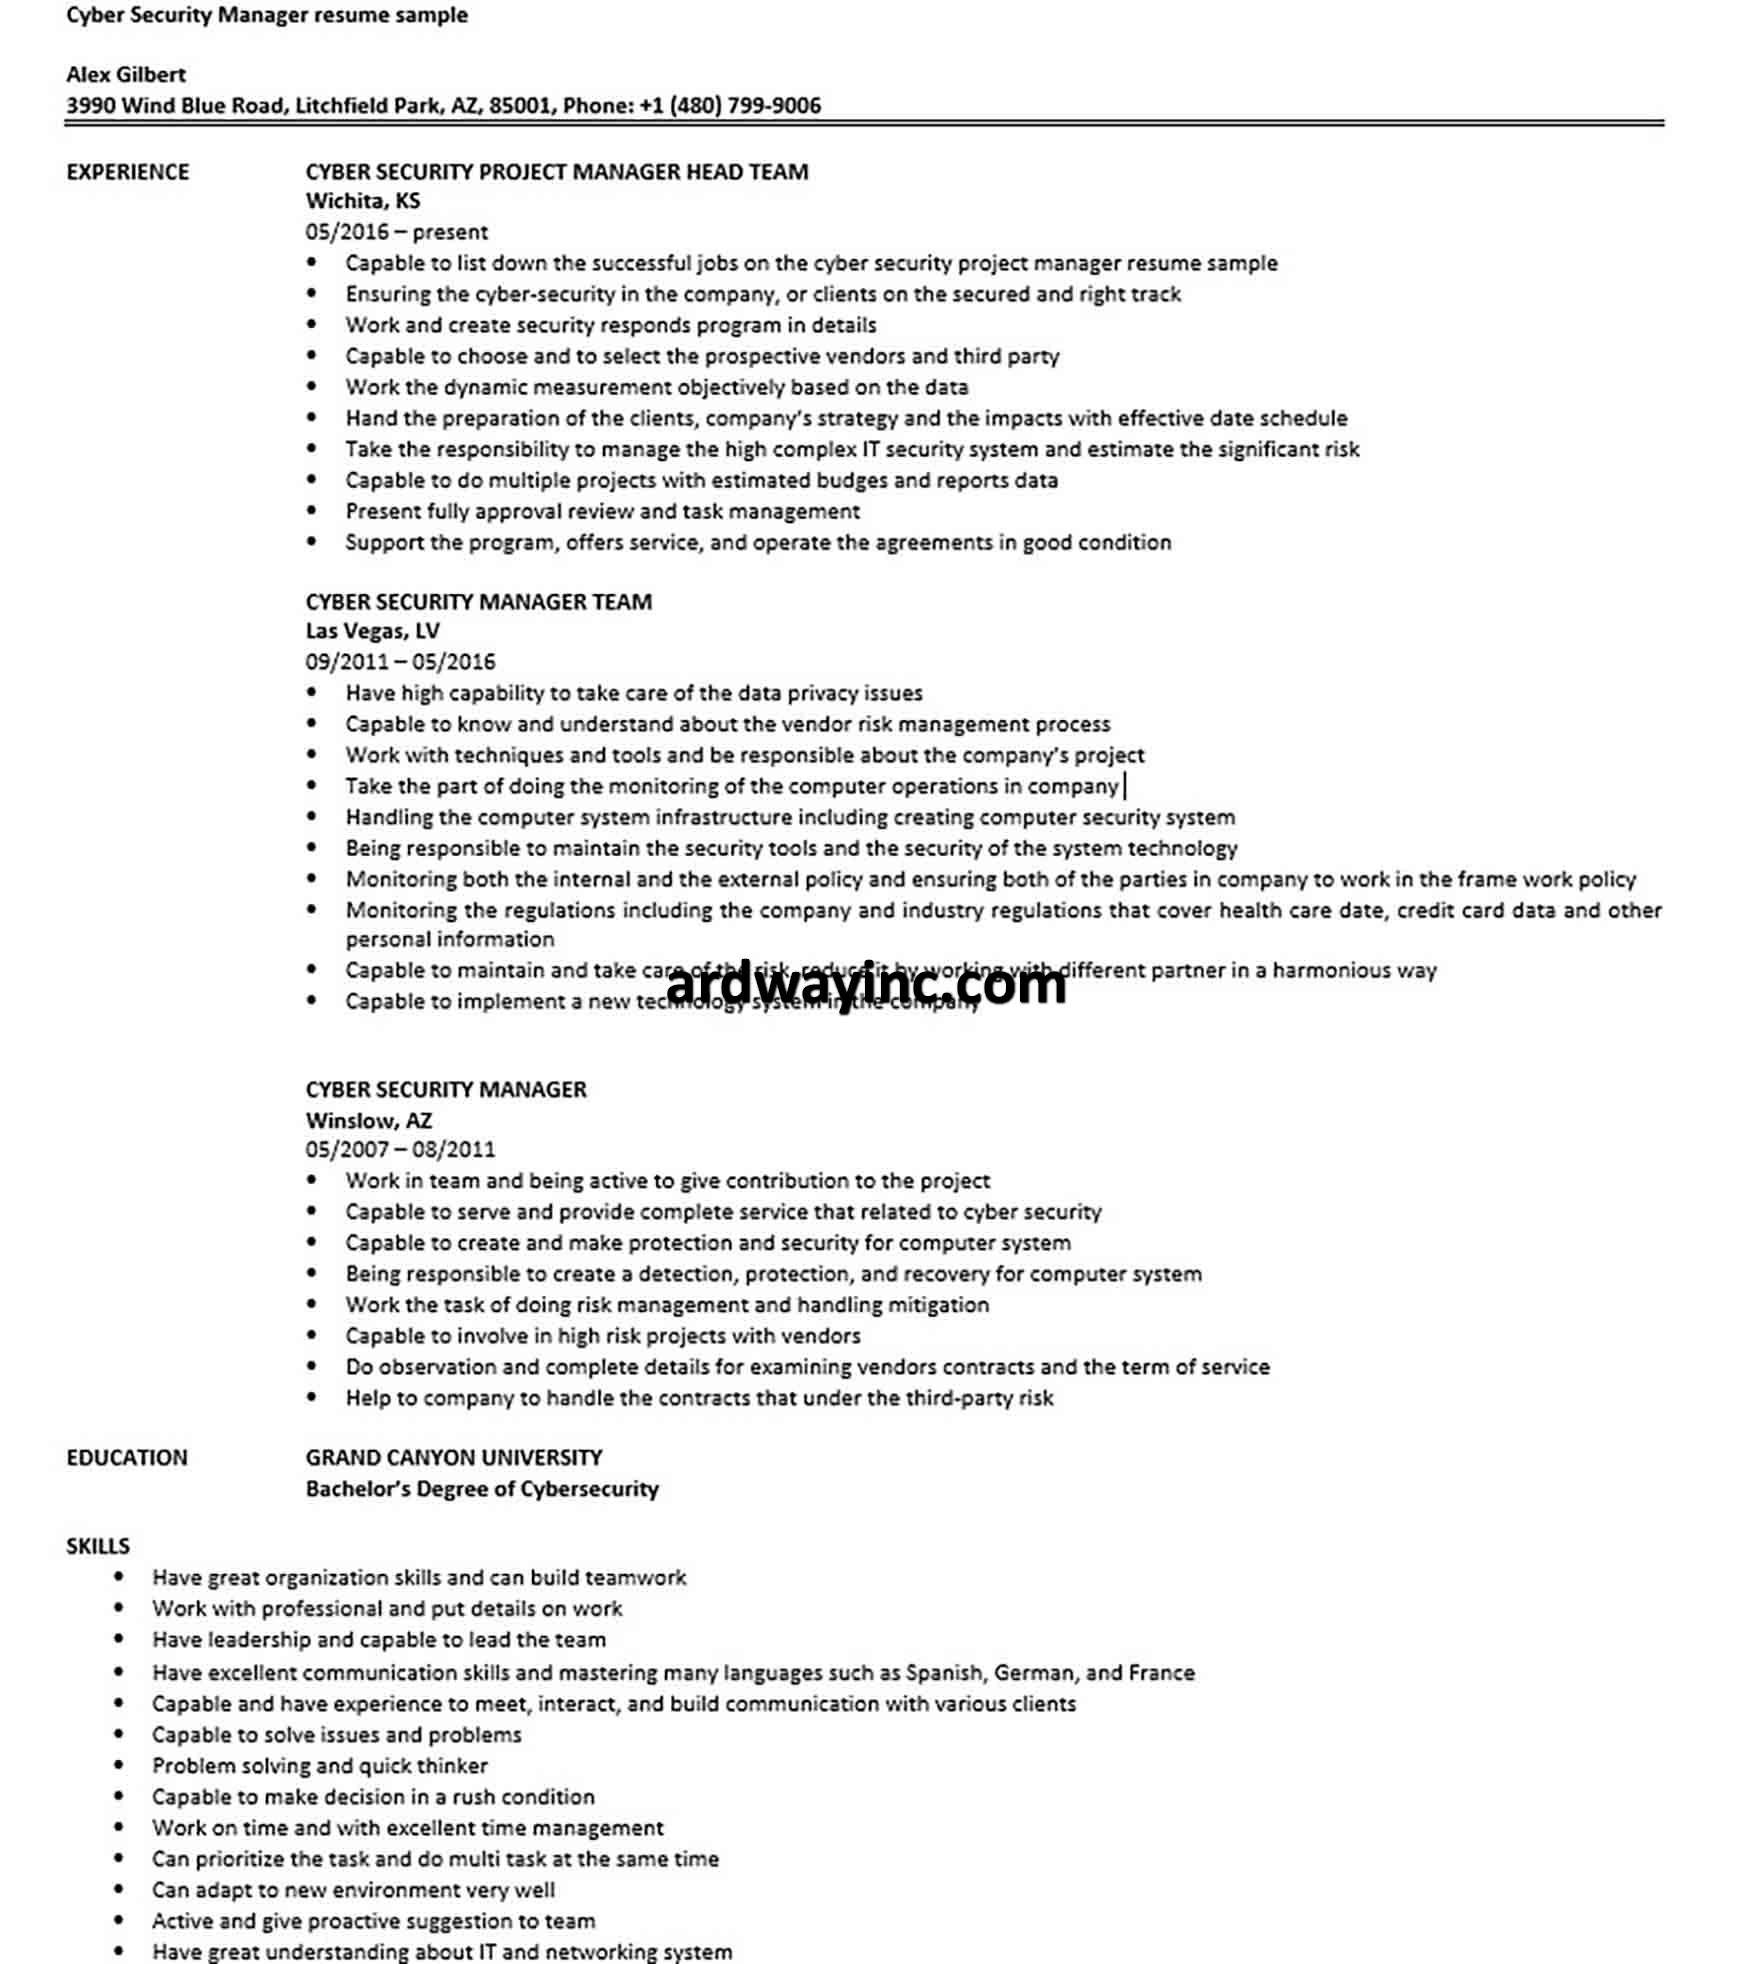 cyber security project manager resume sample